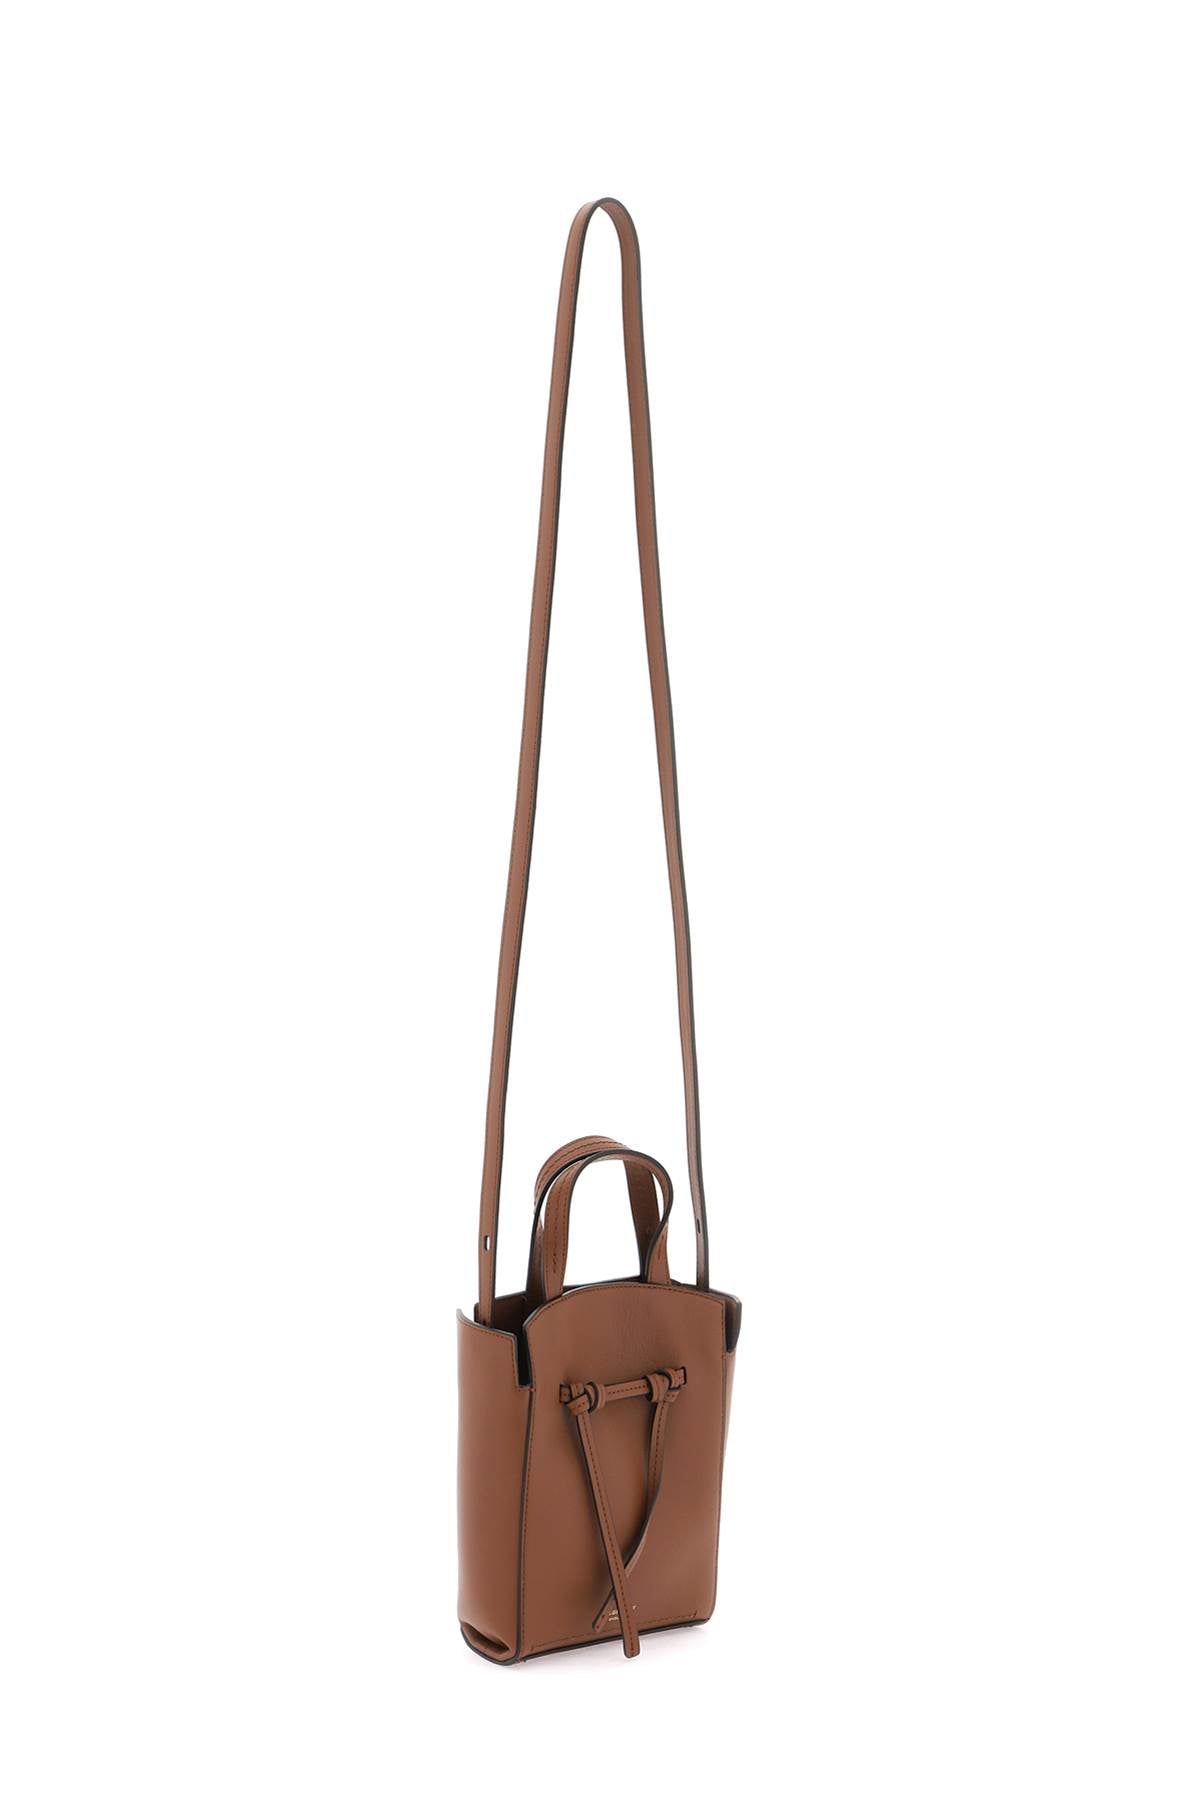 MULBERRY Mini Clovelly Tote - Brown Leather Shoulder Bag with Decorative Knots and Suede Interior